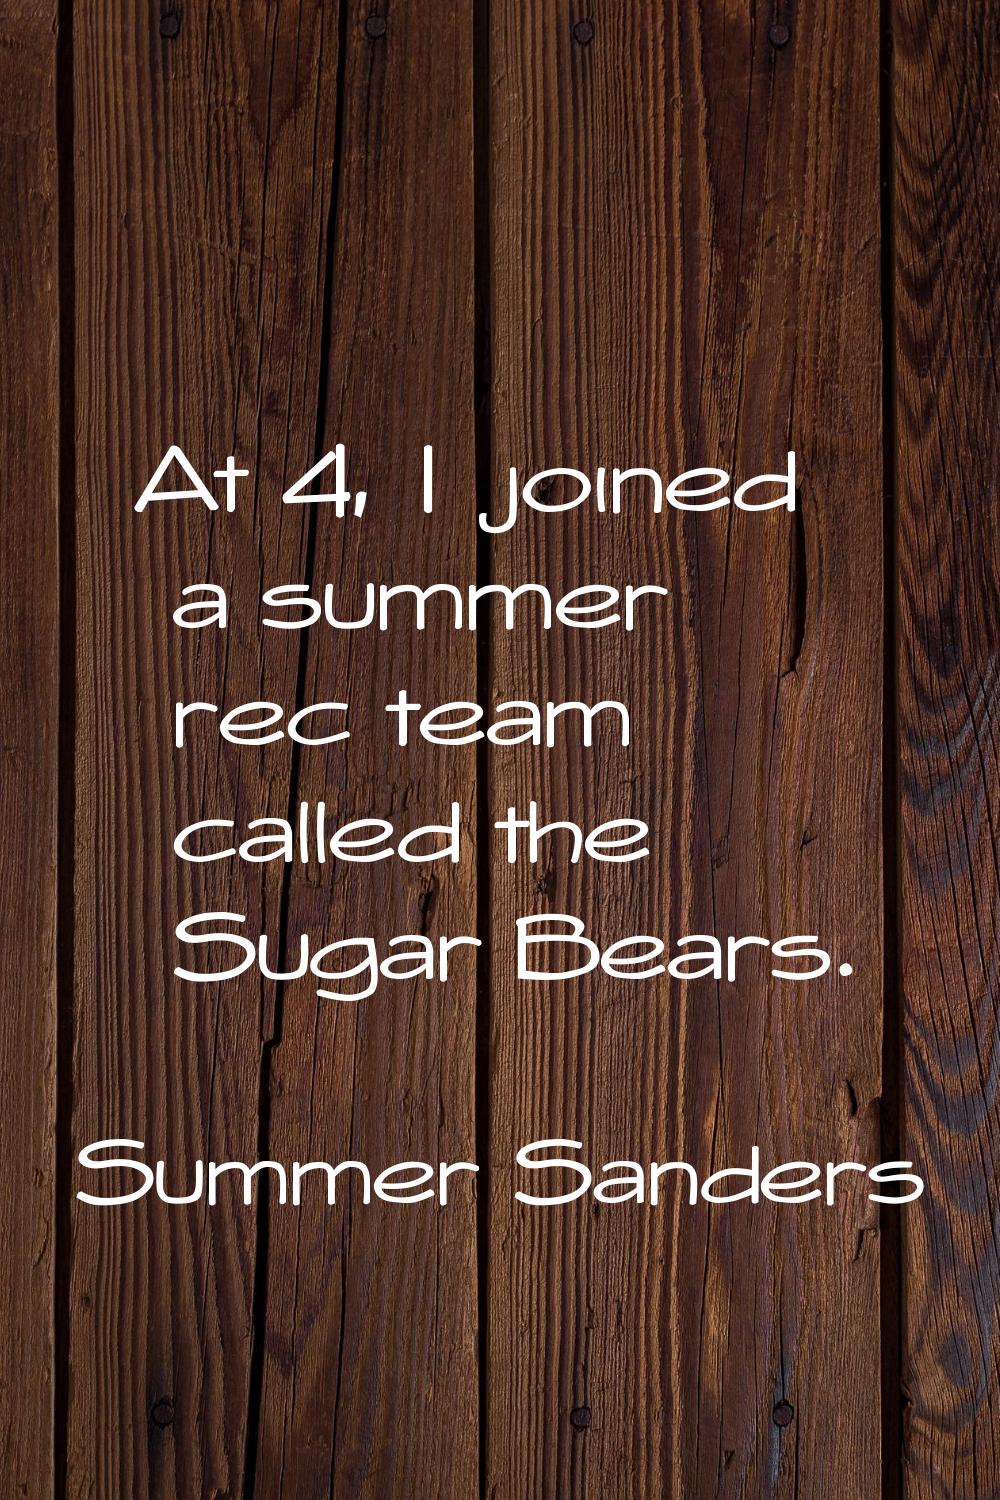 At 4, I joined a summer rec team called the Sugar Bears.